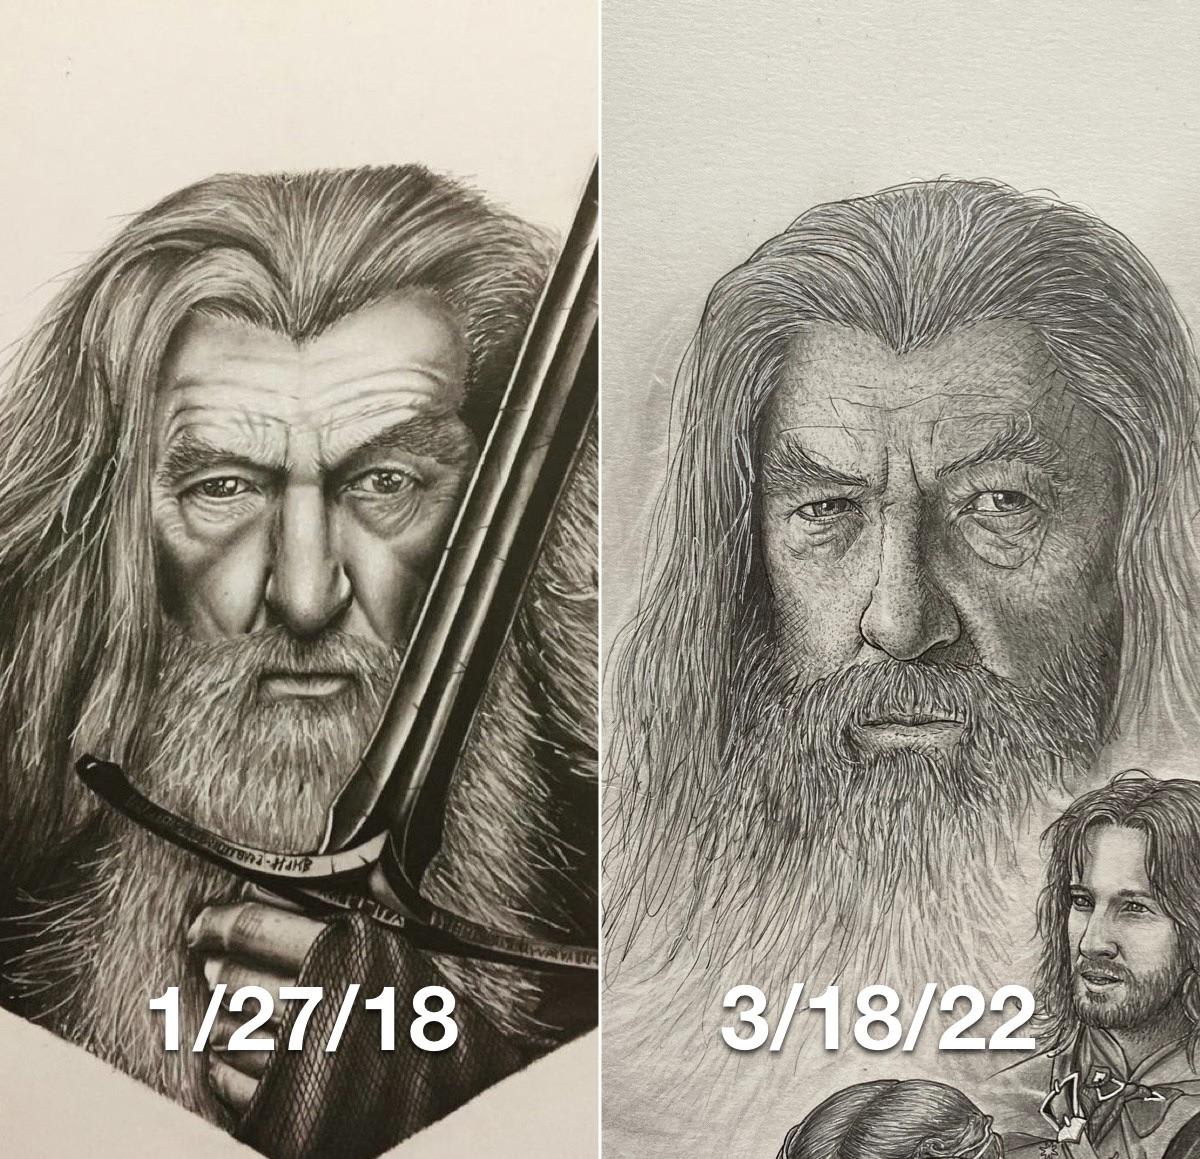 Working on a Lord of the Rings collage and got done with Gandalf recently. I feel I have made significant progress.